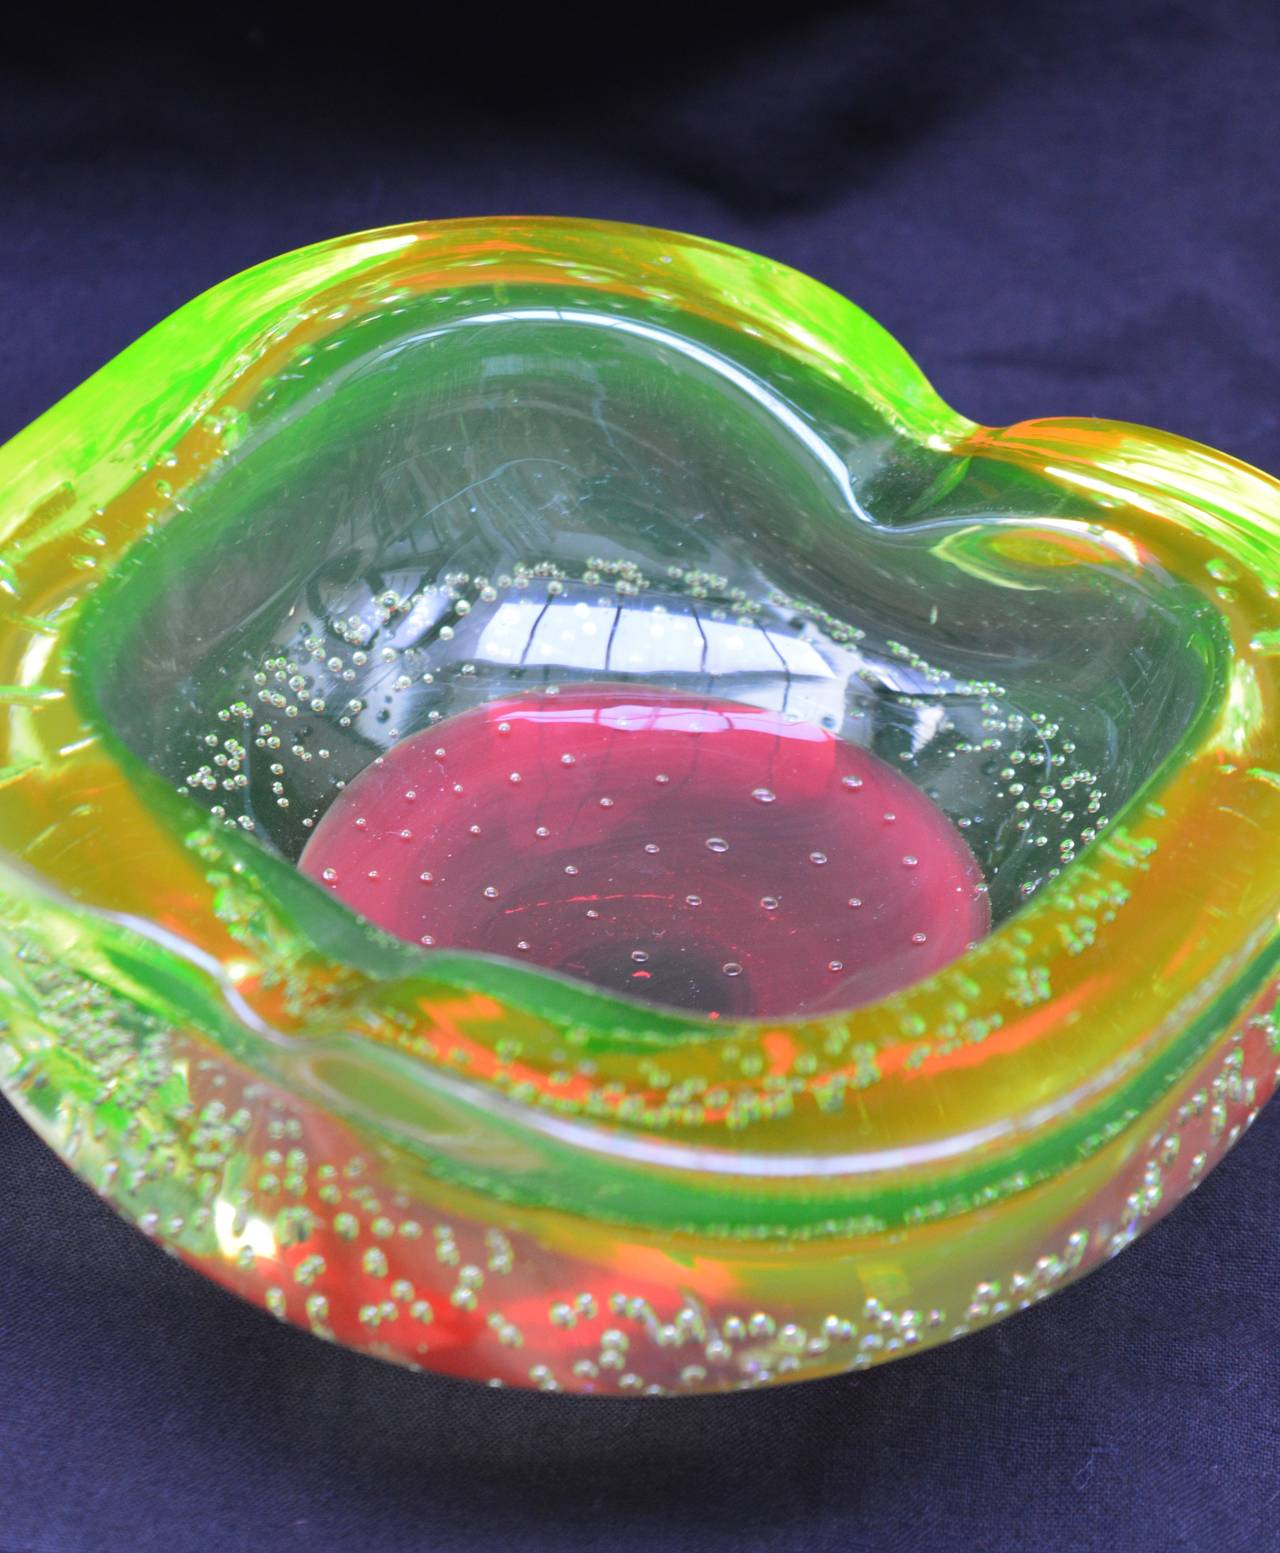 This 1960's Murano glass bowl has a blood red glass center encapsulated in uranium glass. Uranium glass is no longer produced because of the radiation raw uranium produces. 
Uranium has a very special light capturing quality that makes the glass